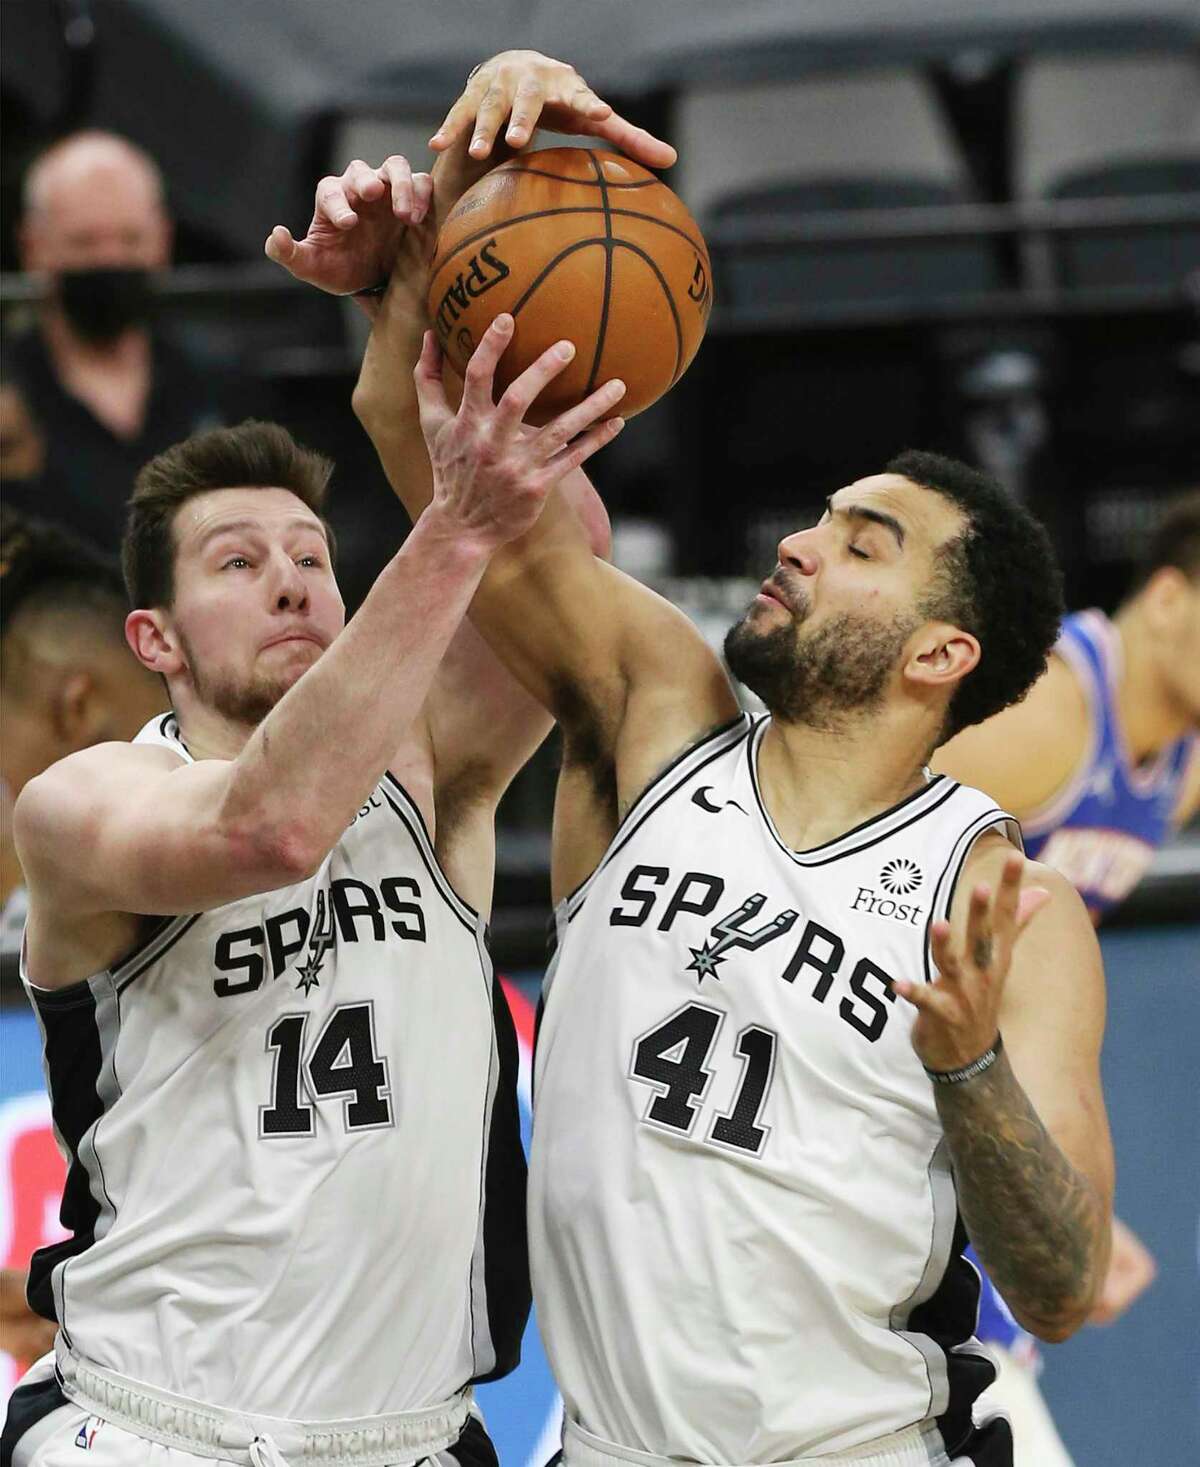 Spurs' Drew Eubanks (14) and Trey Lyles (41) both go up for a rebound against the New York Knicks at the AT&T Center on Tuesday, Mar. 2, 2021. Spurs defeated the Knicks, 119-93.